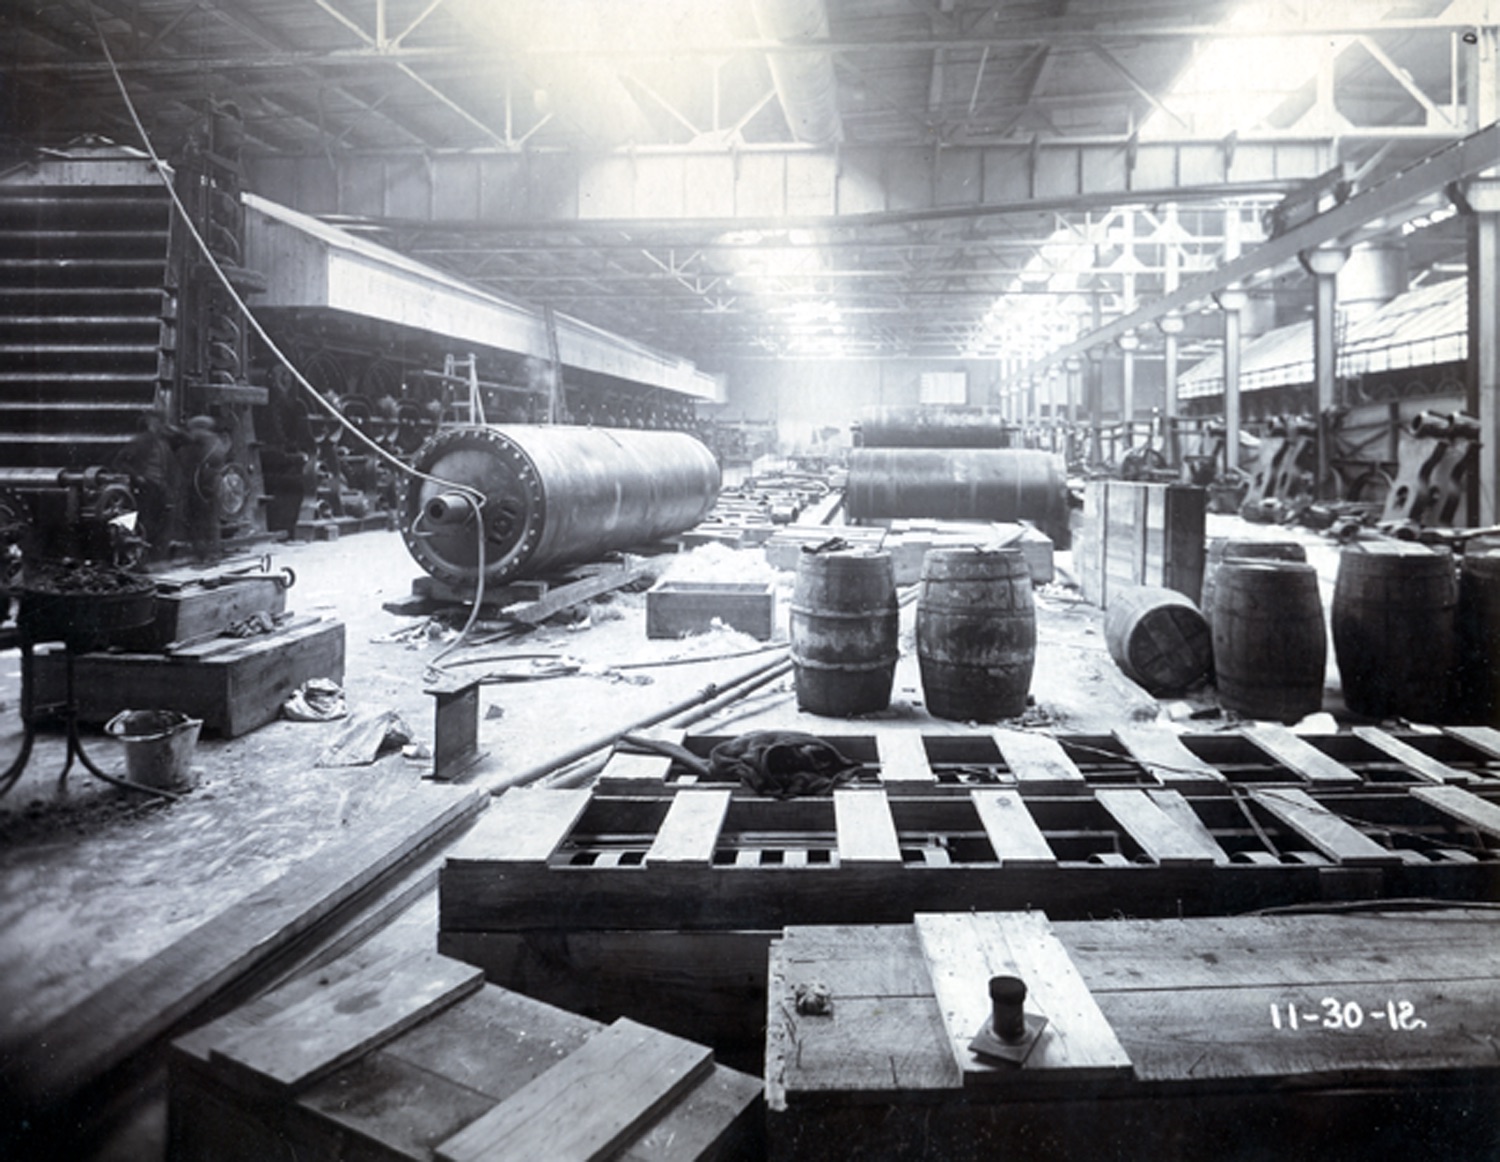 Paper mill warehouse, wooden barrels, crates, and paper rollers strewn across the floor.